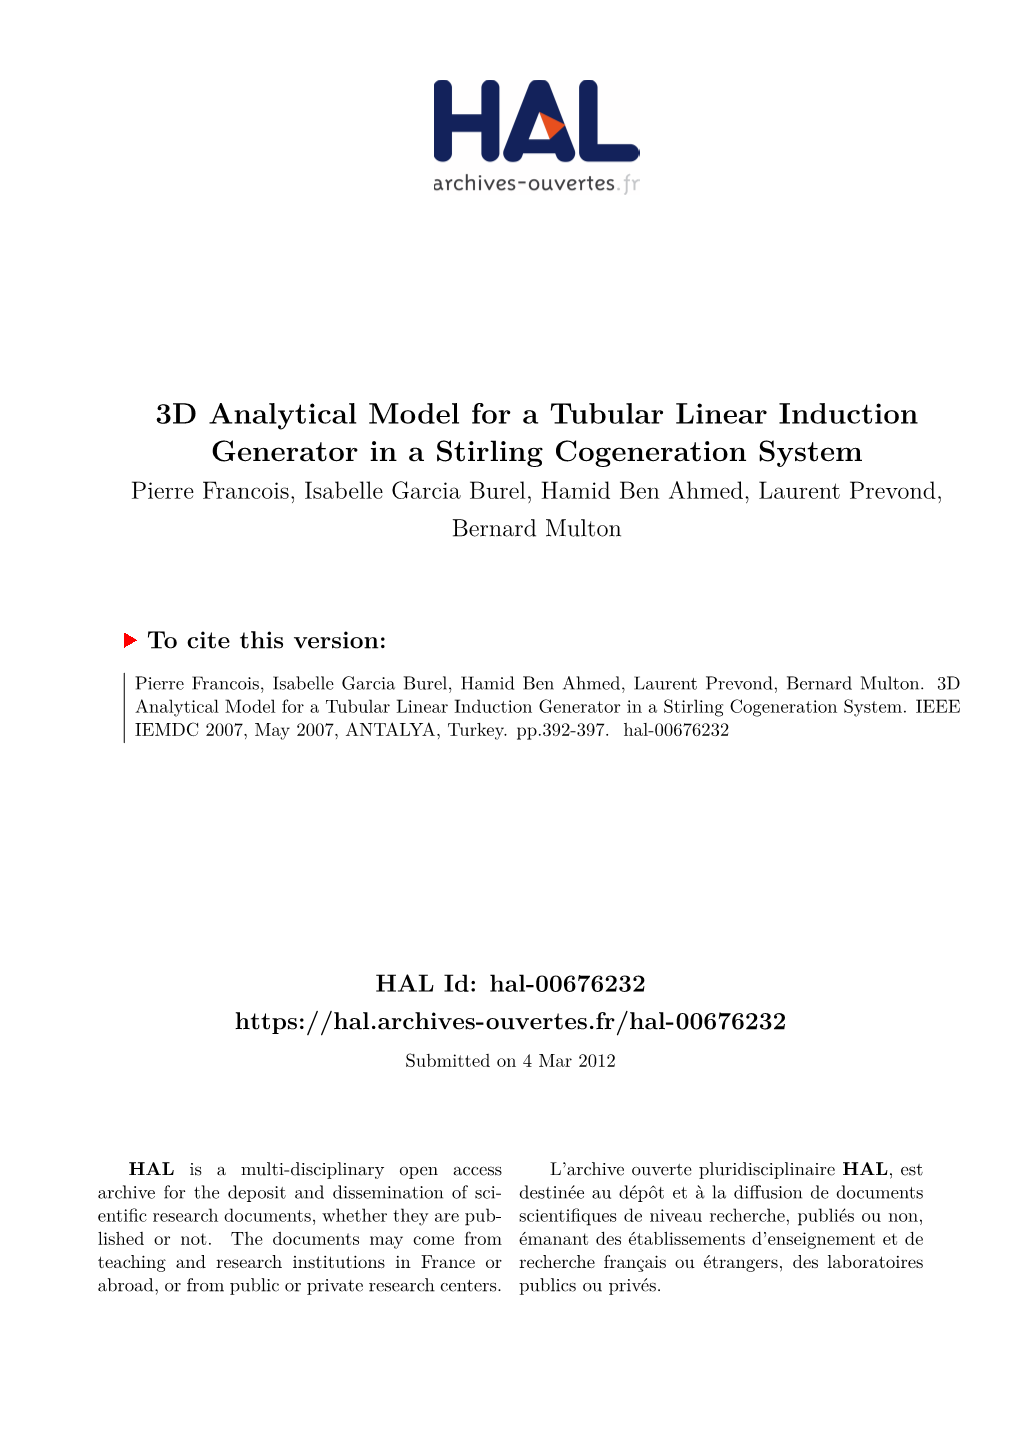 3D Analytical Model for a Tubular Linear Induction Generator in a Stirling Cogeneration System